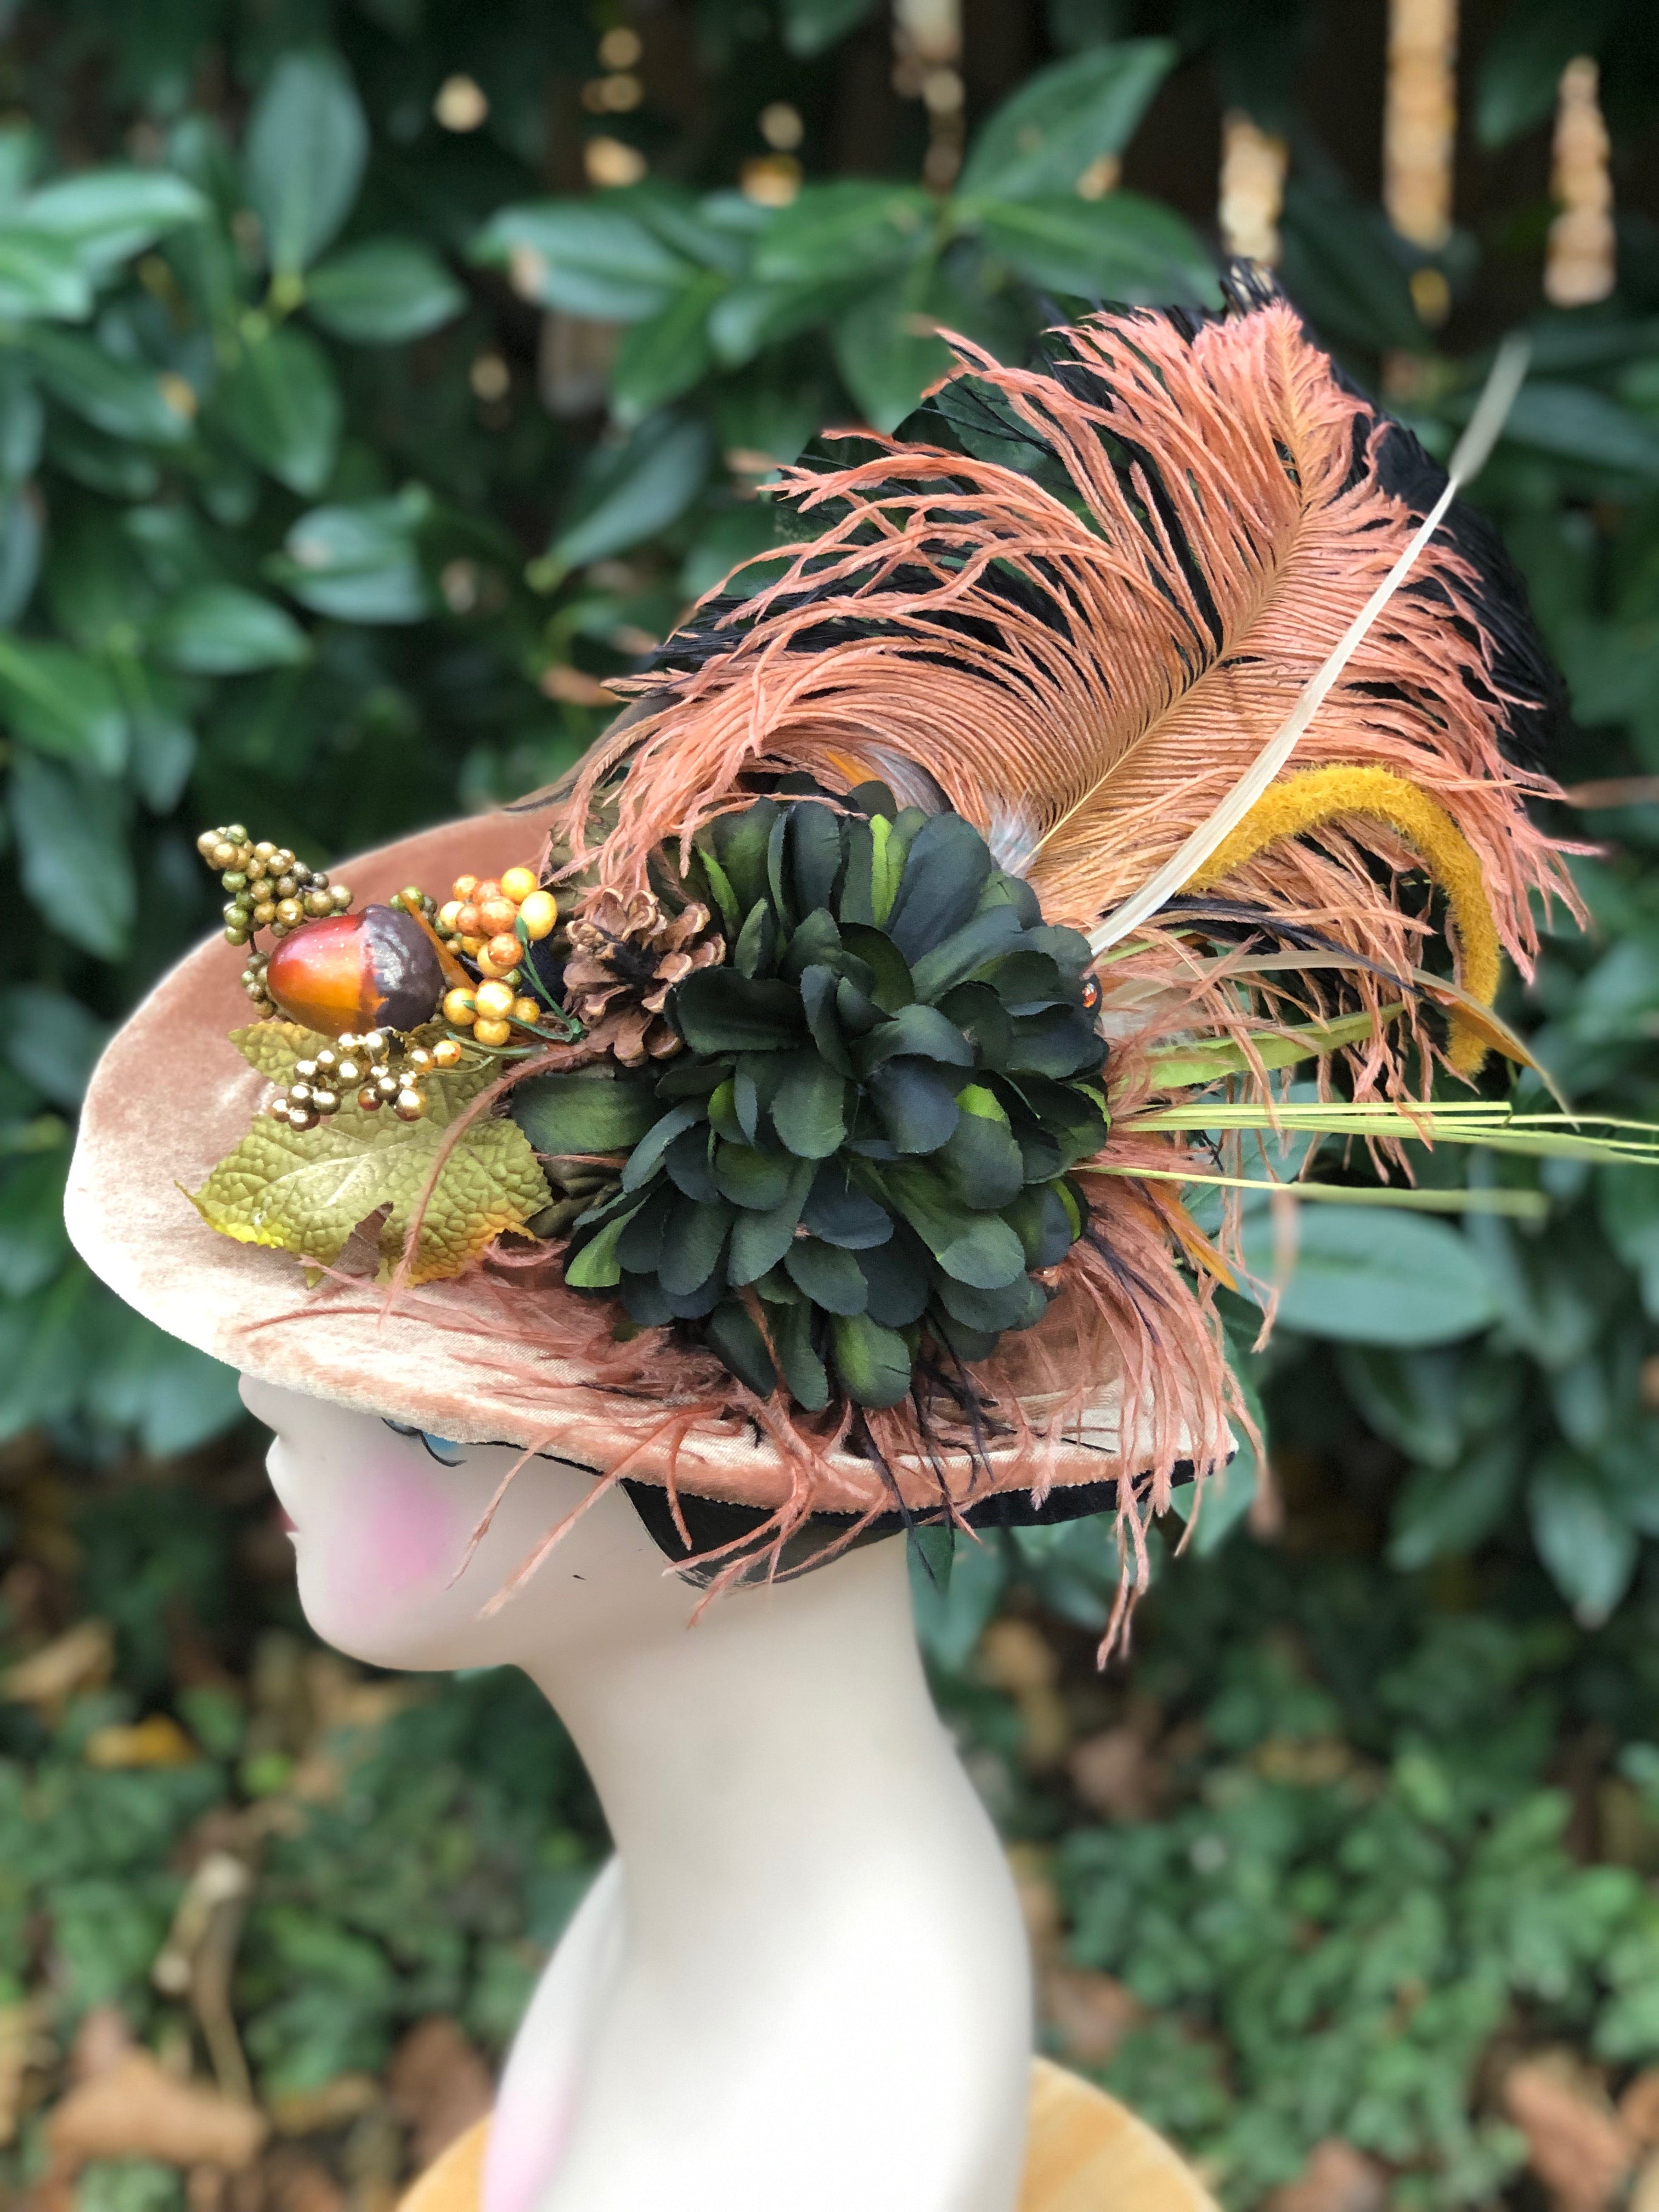 Alewife Hat, Fancy and Extravagant, for Ladies